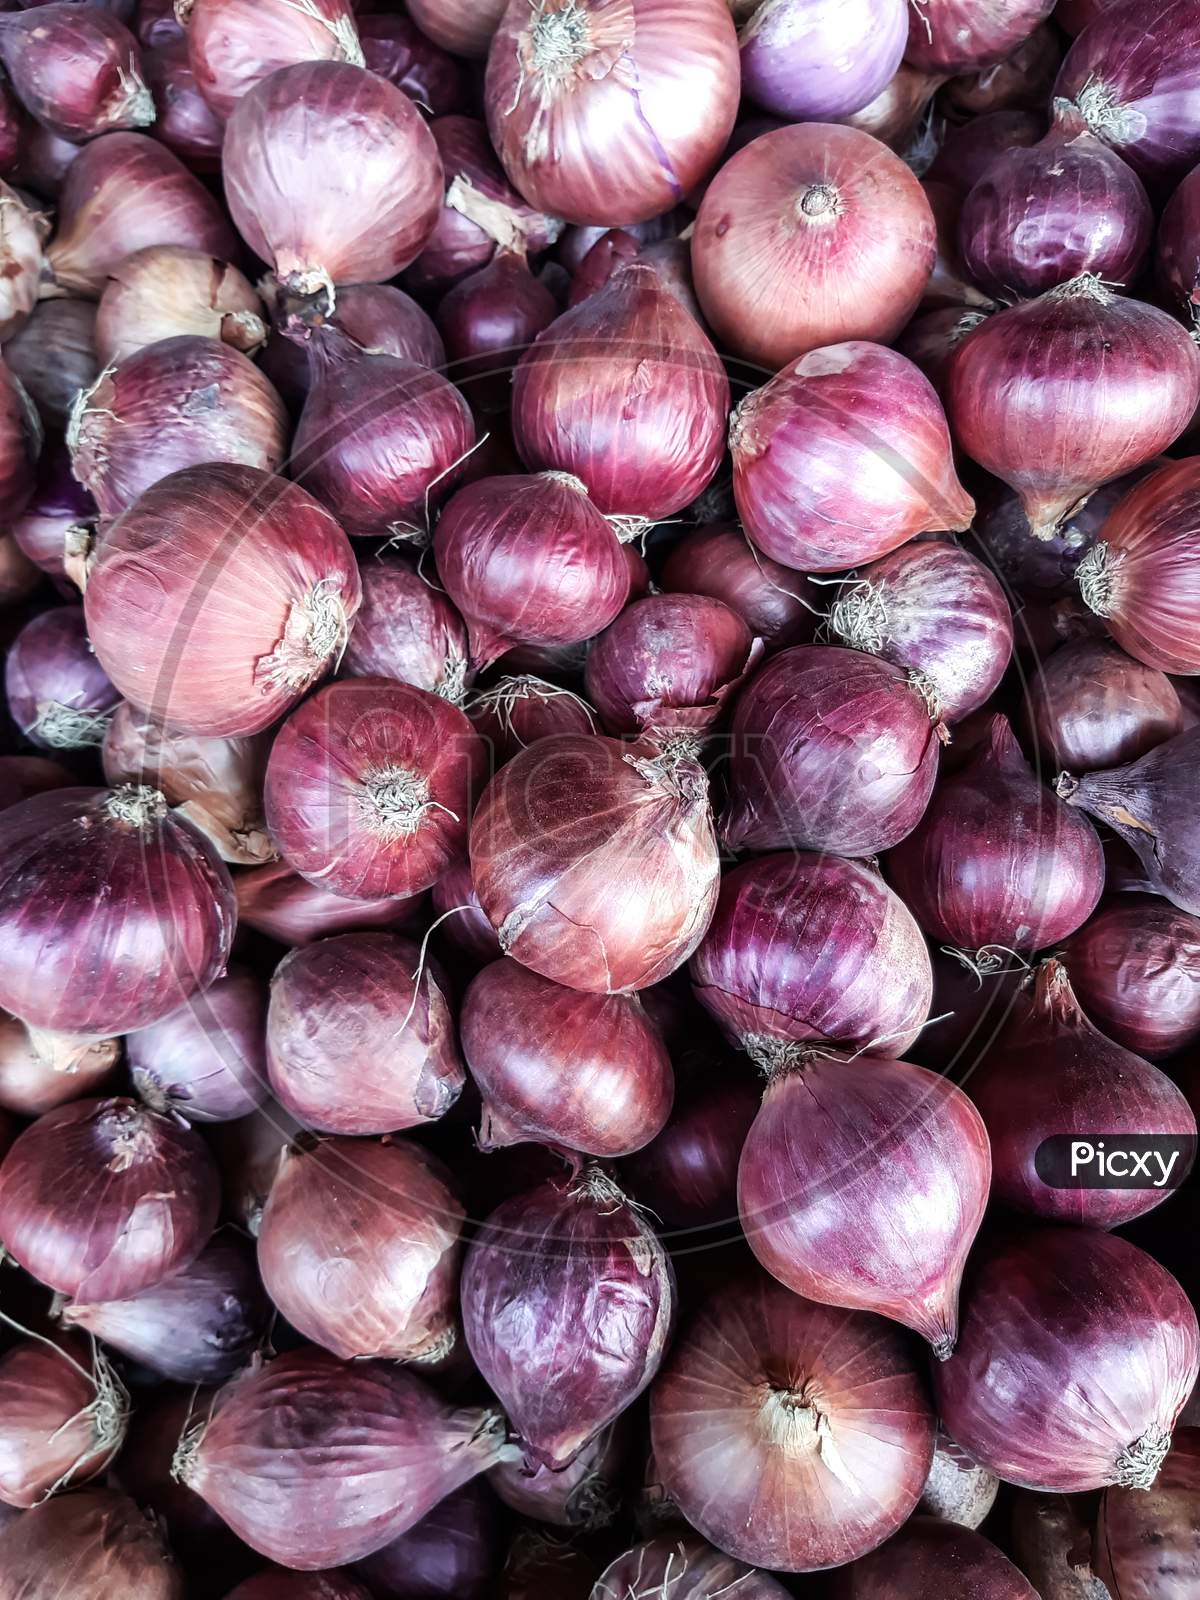 Many Shot Onions Are Placed In A Basket In Front Of The Store.